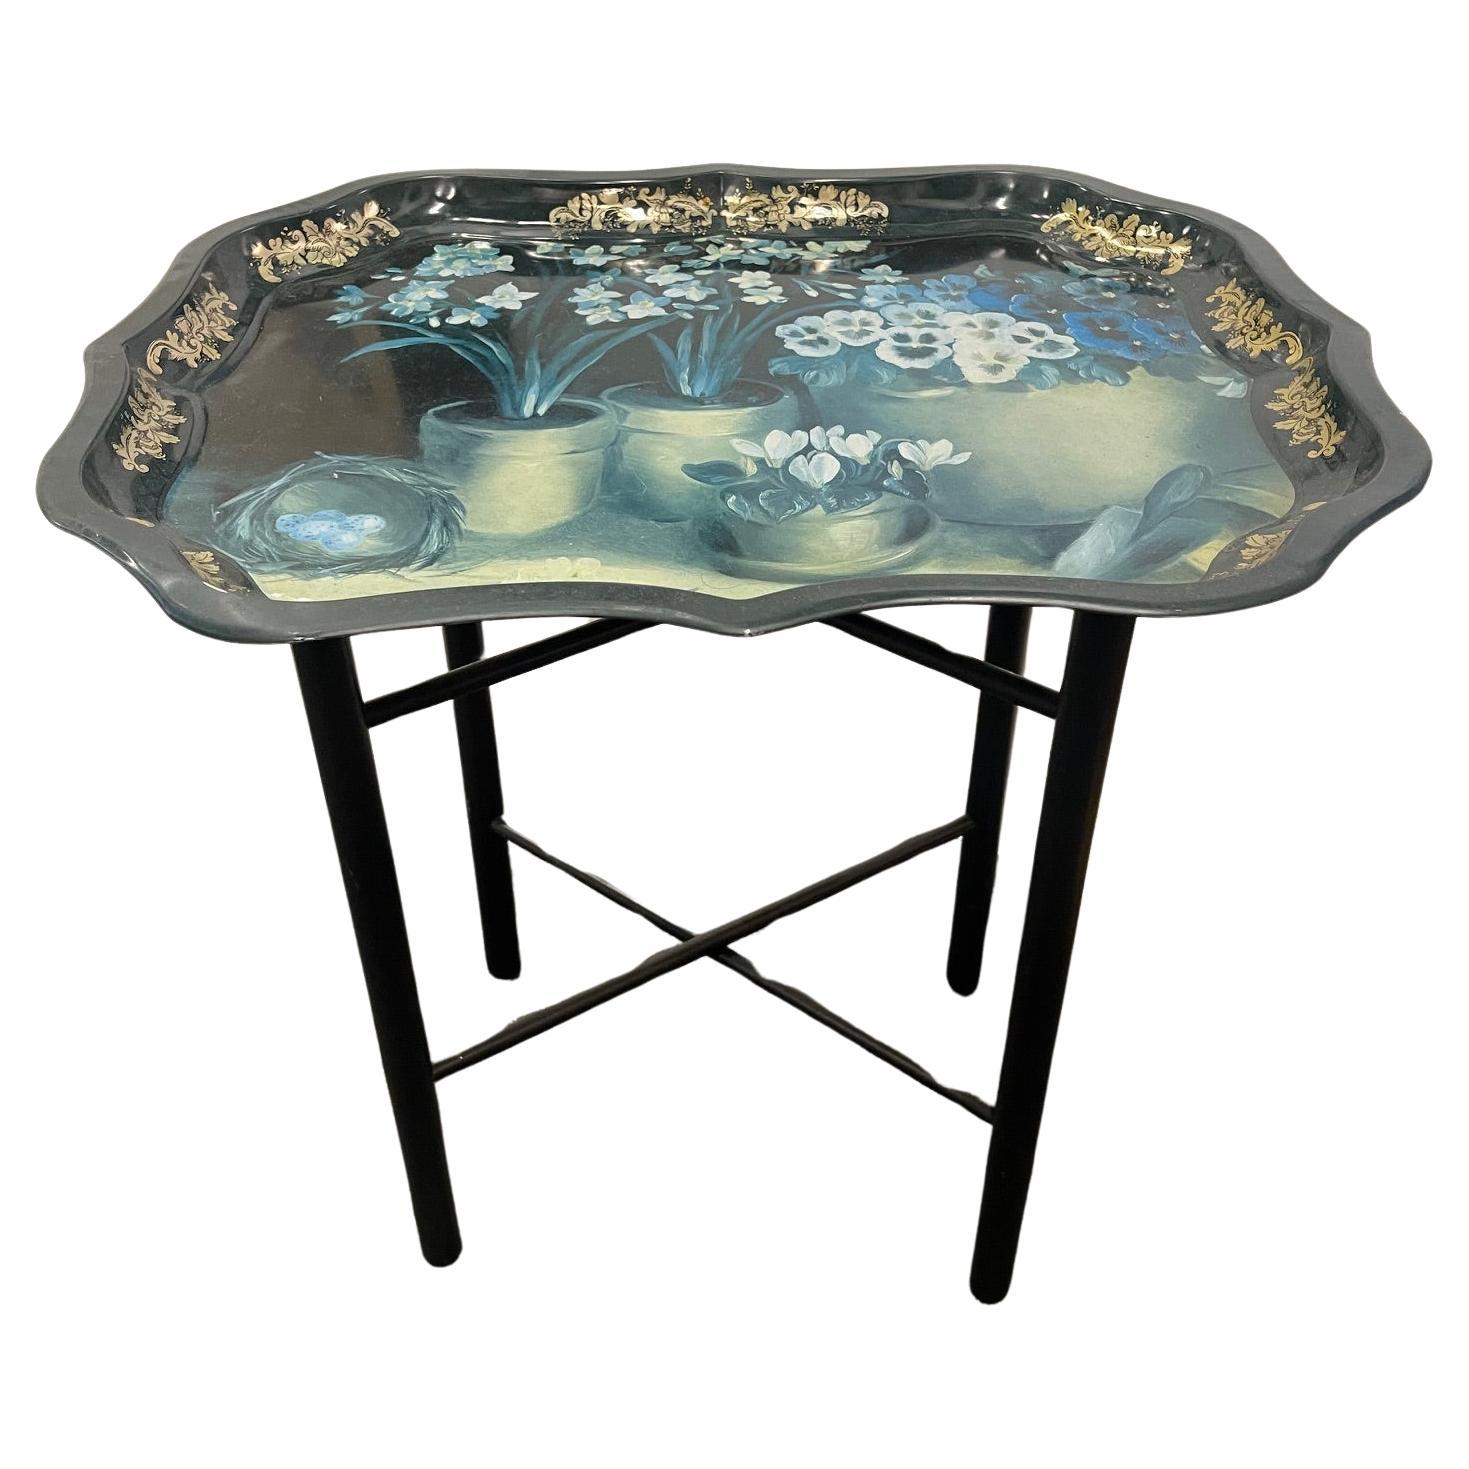 English Tole Tray Table with Floral Design, 20th Century For Sale